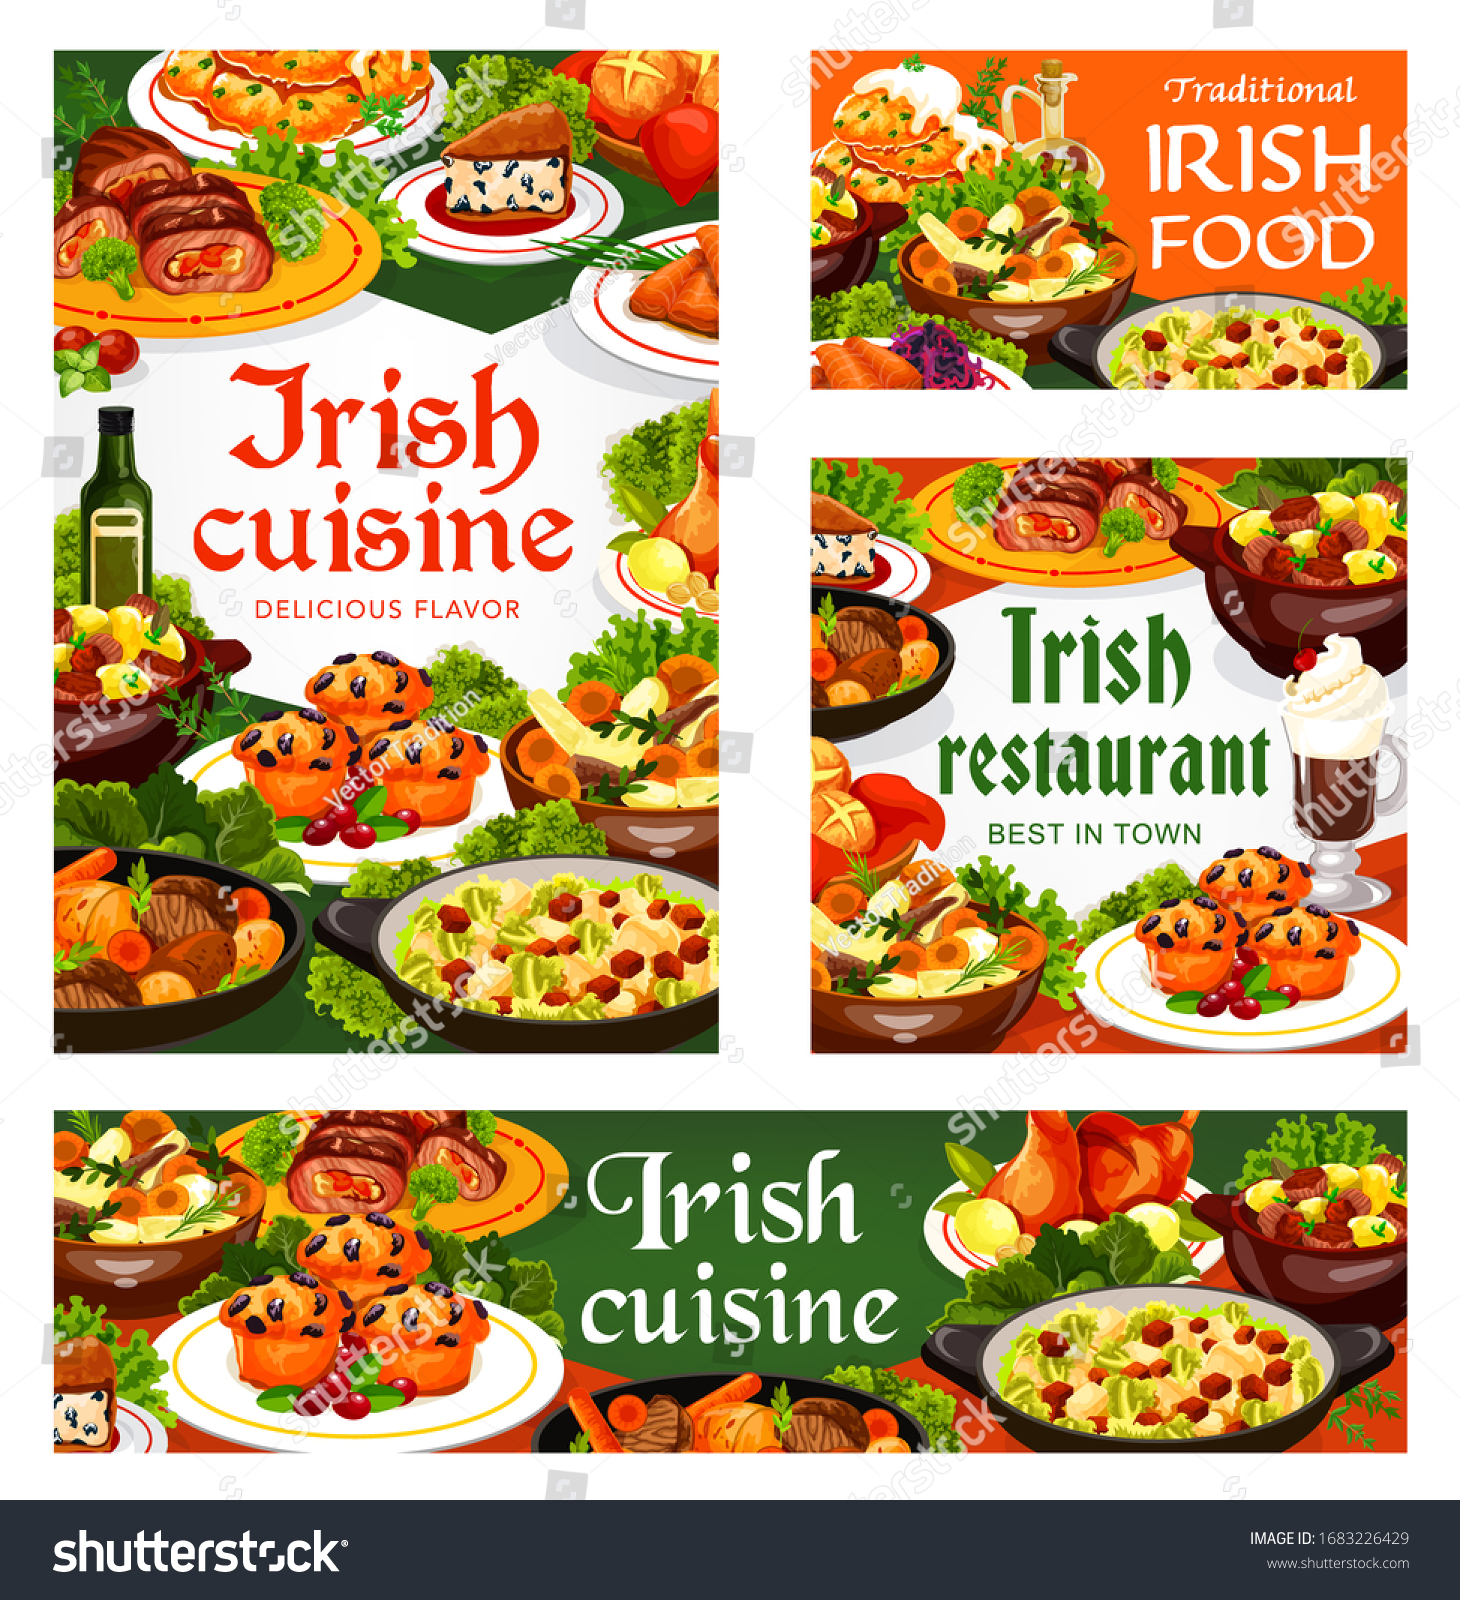 SVG of Irish cuisine meat, vegetable and fish meal with desserts, vector food. Beef, lamb and rabbit stews, potato pancakes, cabbage salad and grilled salmon, soda bread, lingonberry cupcakes and colcannon svg